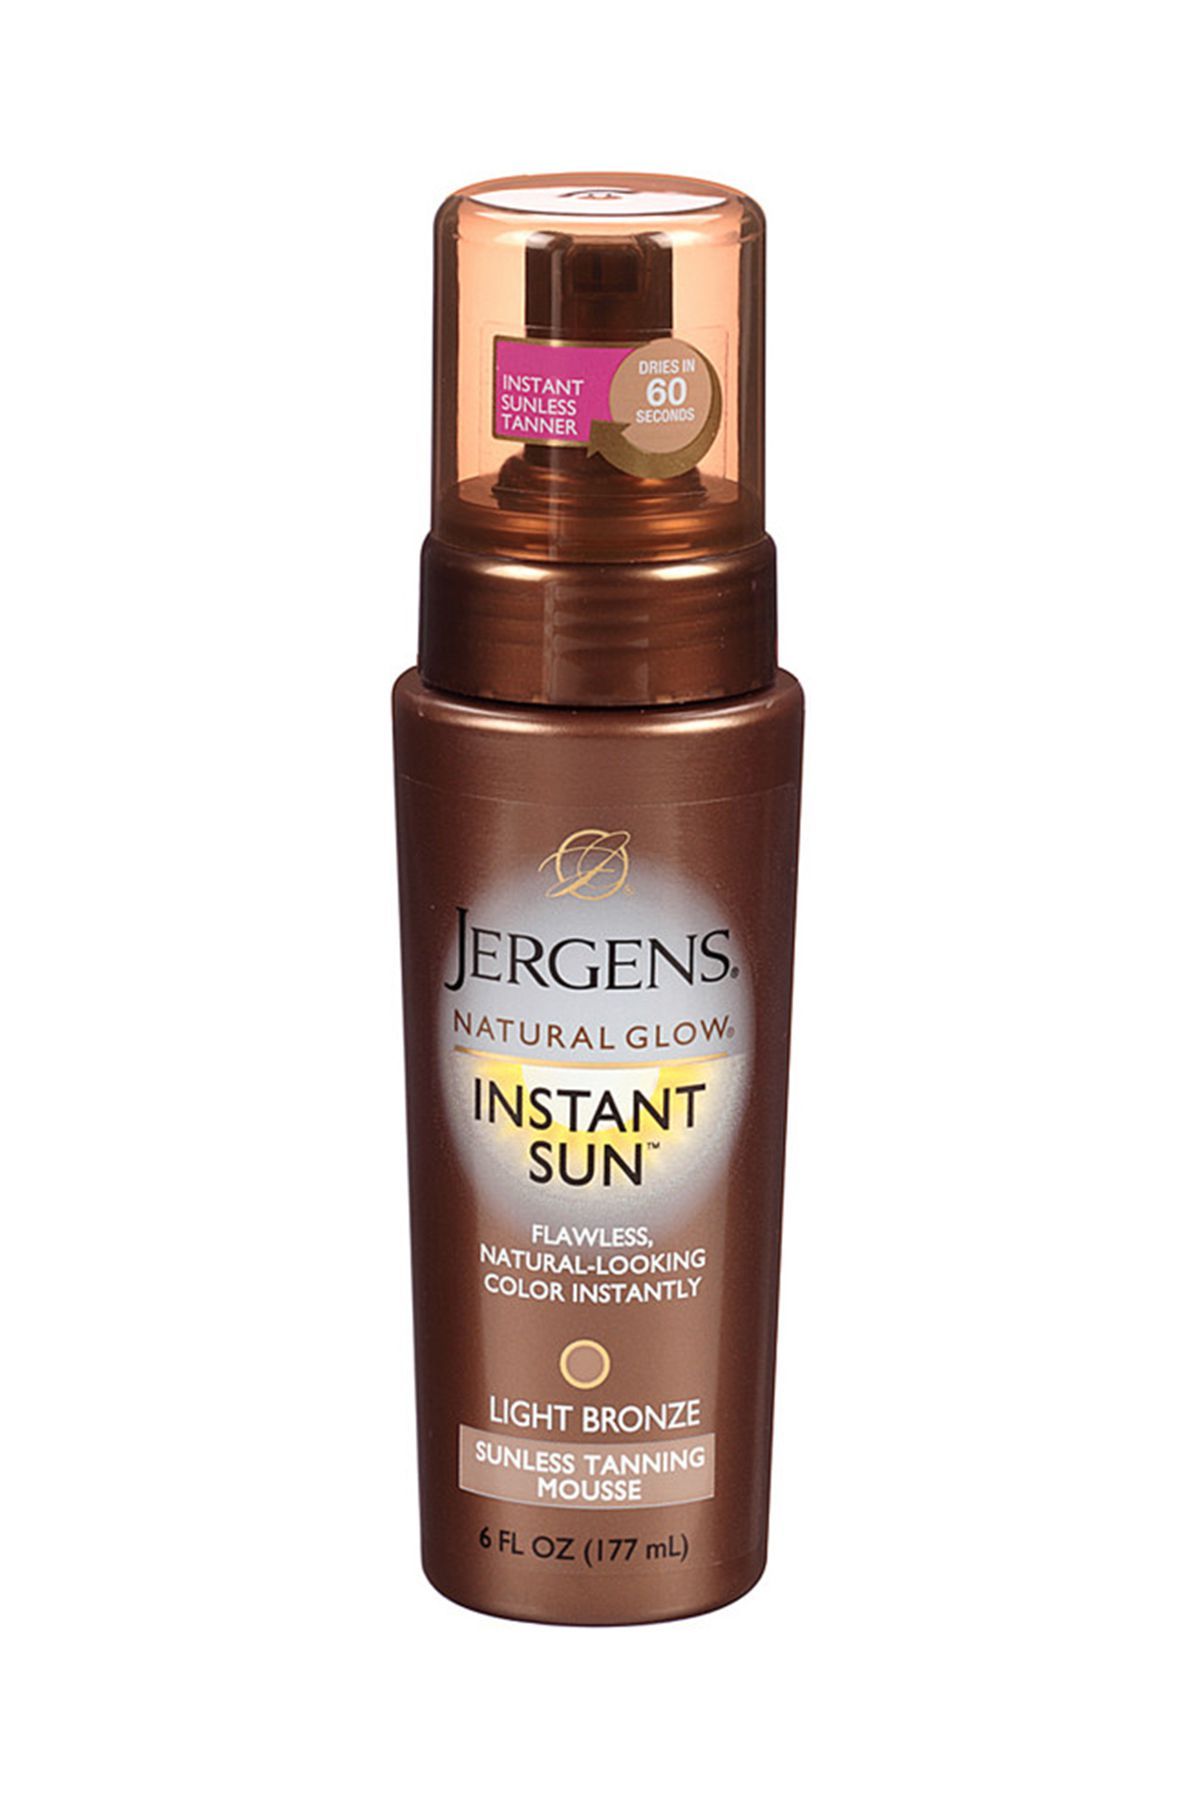 13 Best Self Tanners of 2022 - Top Sunless Tanner Products & Lotions